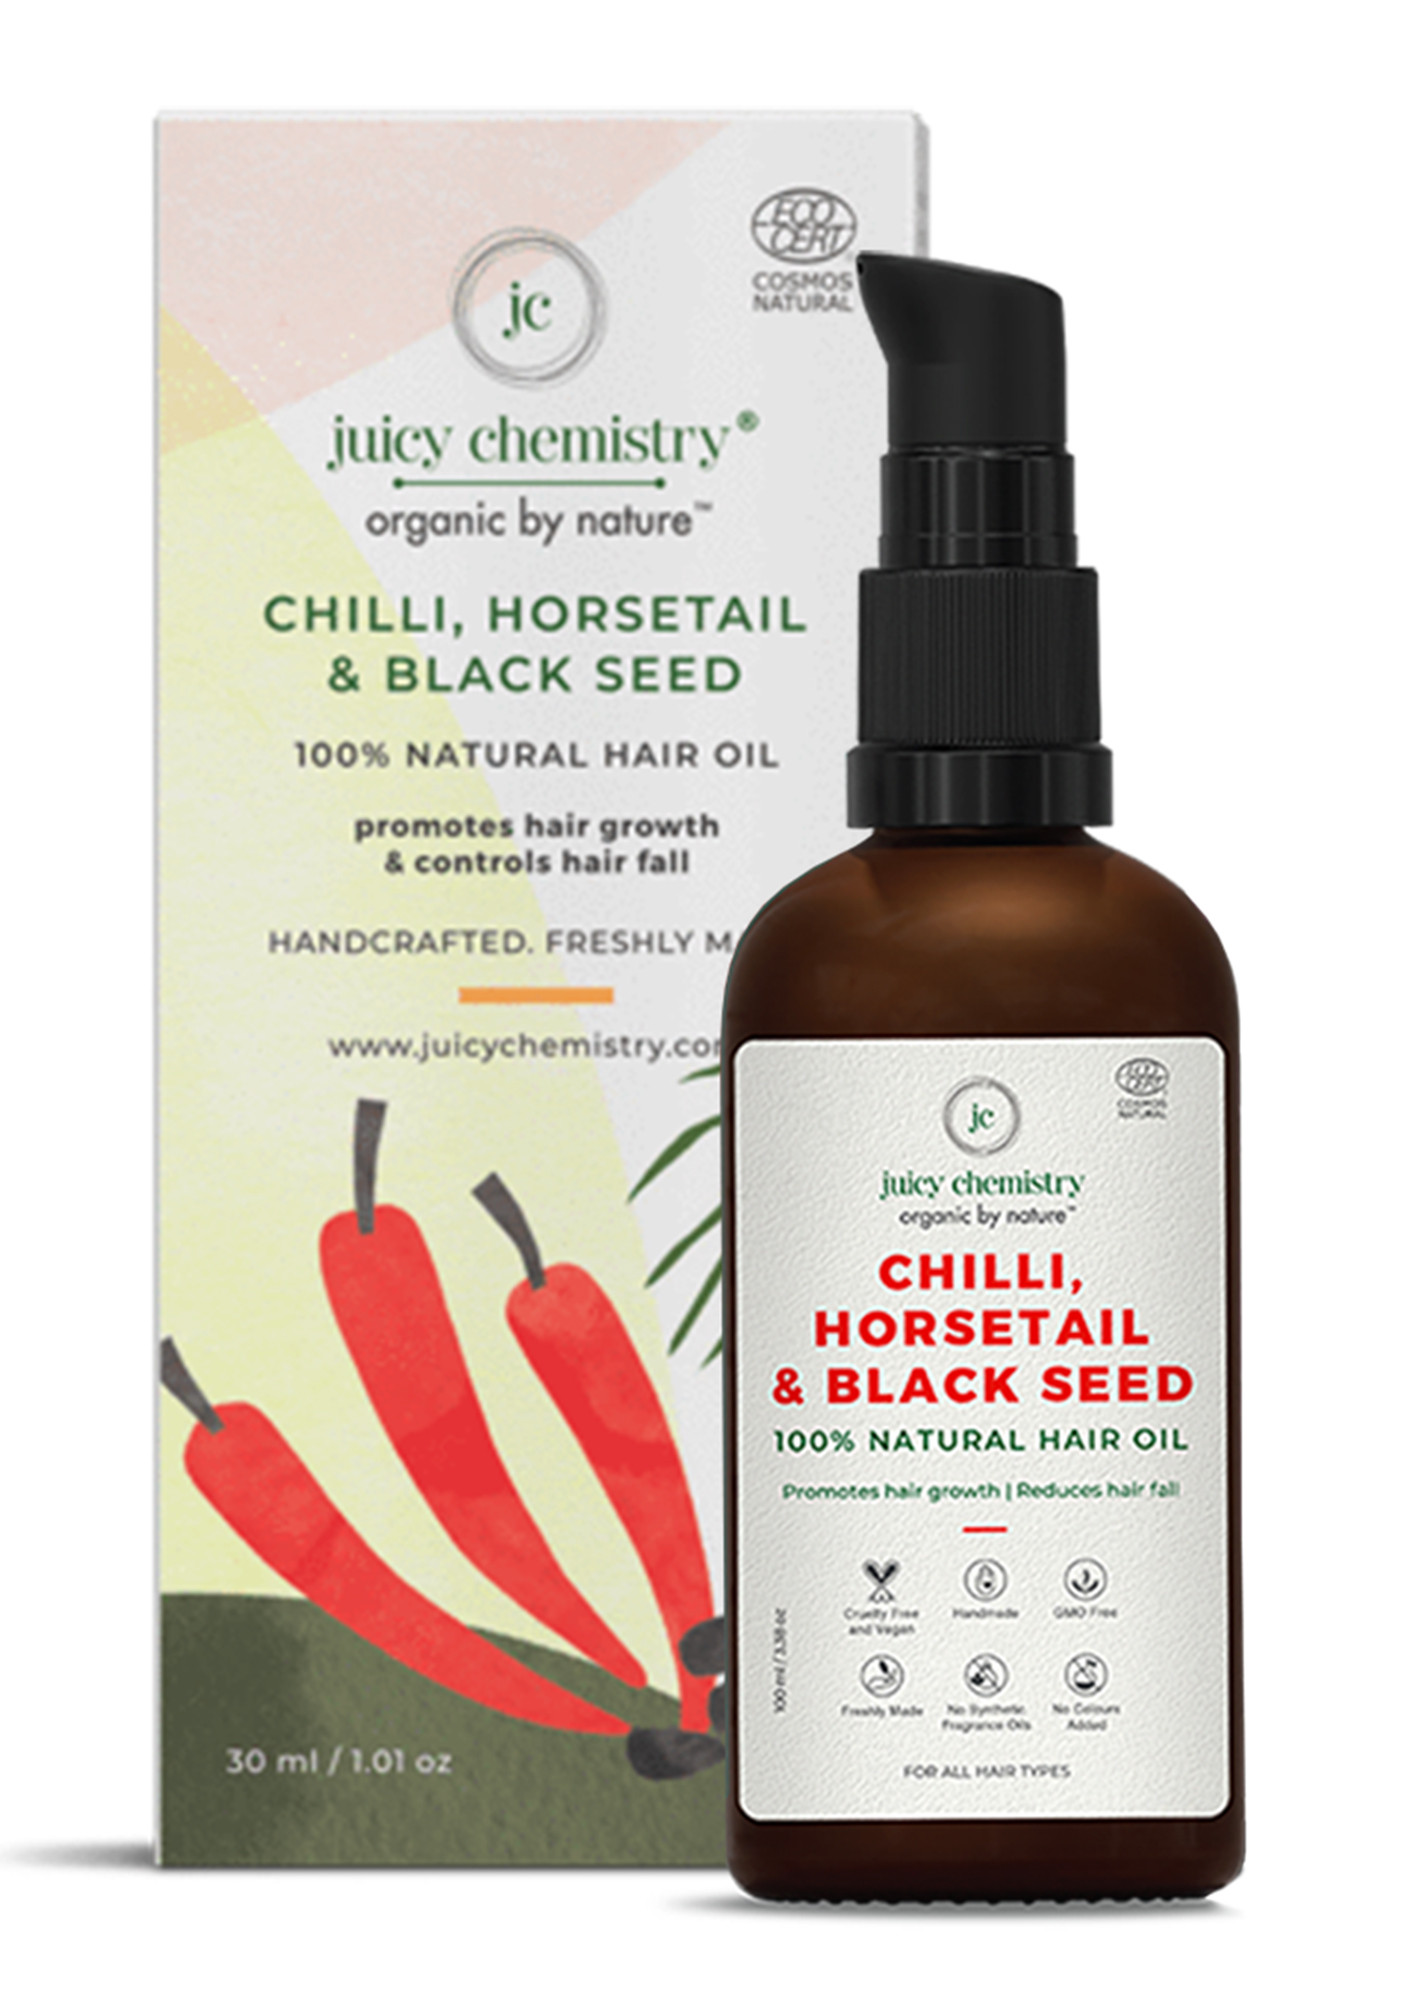 Juicy Chemistry Chilly, Horsetail & Black Seed  Organic Hair Serum -Promotes Hair Growth & Controls Hair Fall -30ml/1.01oz